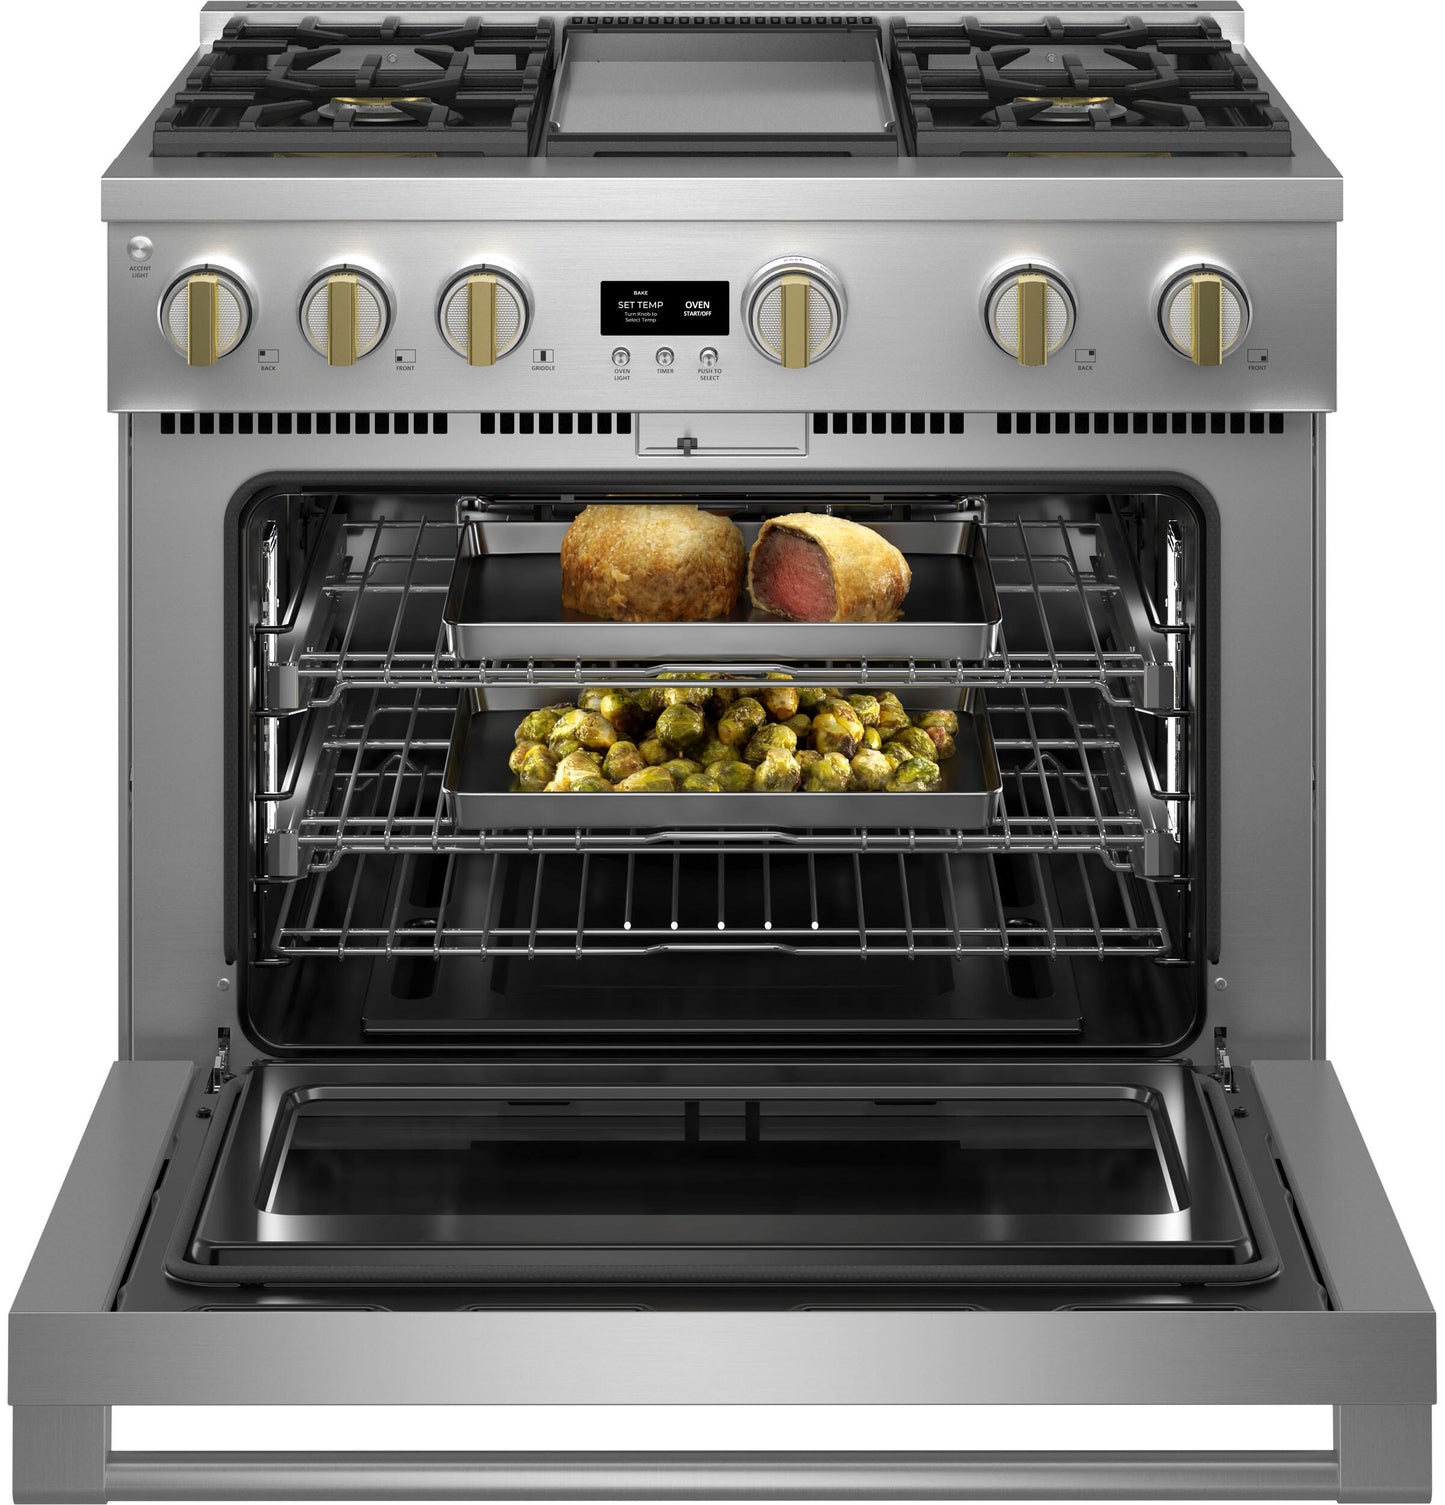 Monogram ZGP364NDTSS Monogram 36" All Gas Professional Range With 4 Burners An Griddle (Natural Gas)